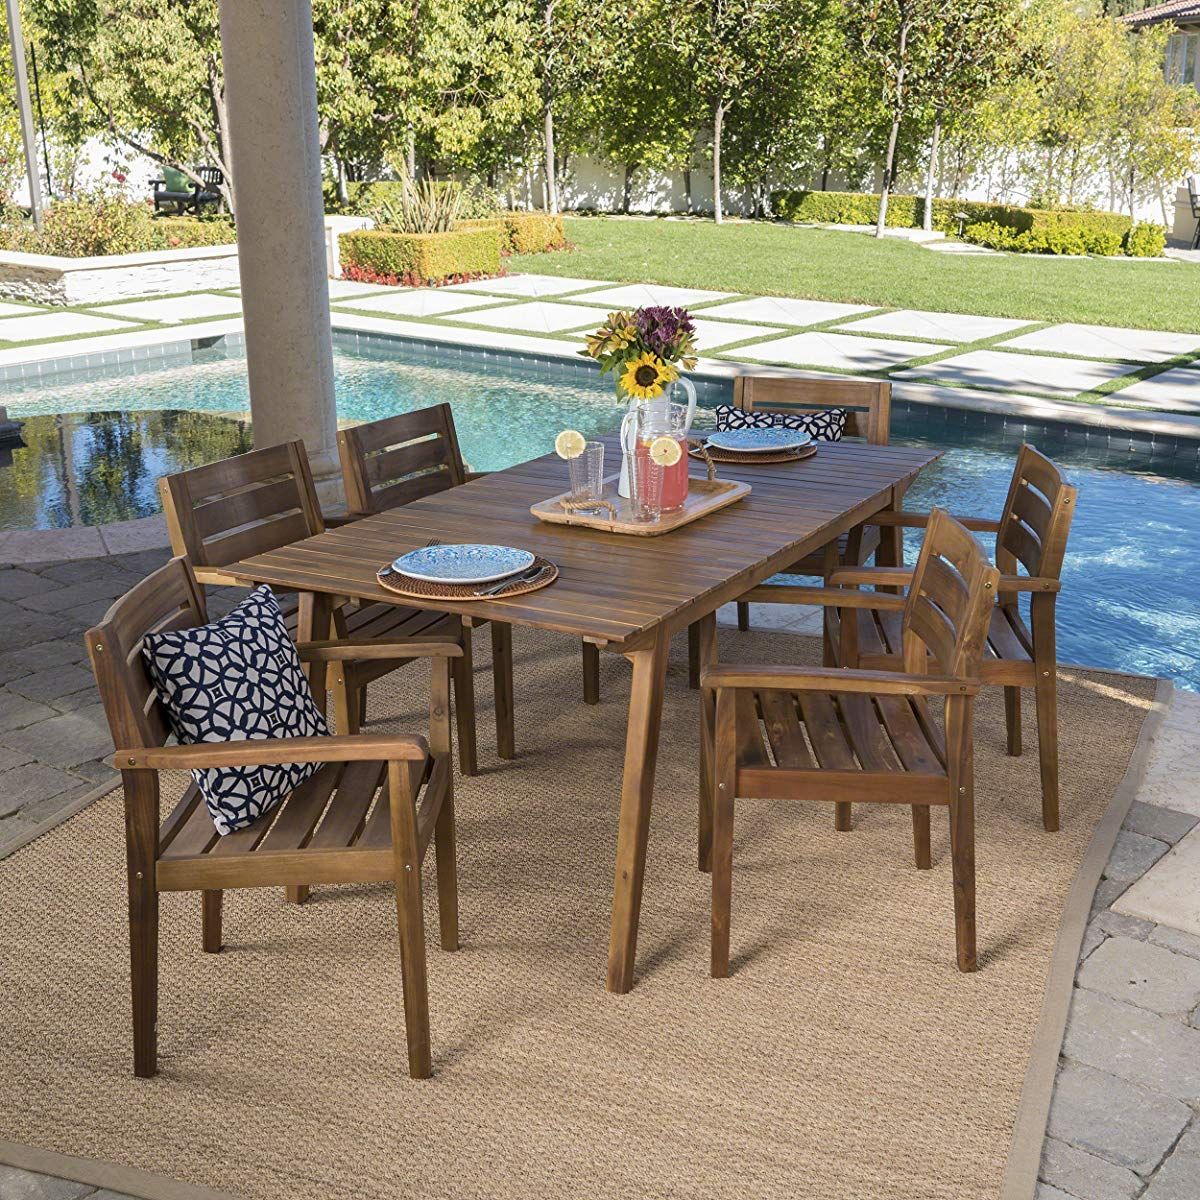 Outdoor Teak Finished Acacia Wood Dining Set | Patio Dining Set, Teak Regarding Teak Outdoor Square Dining Sets (View 3 of 15)